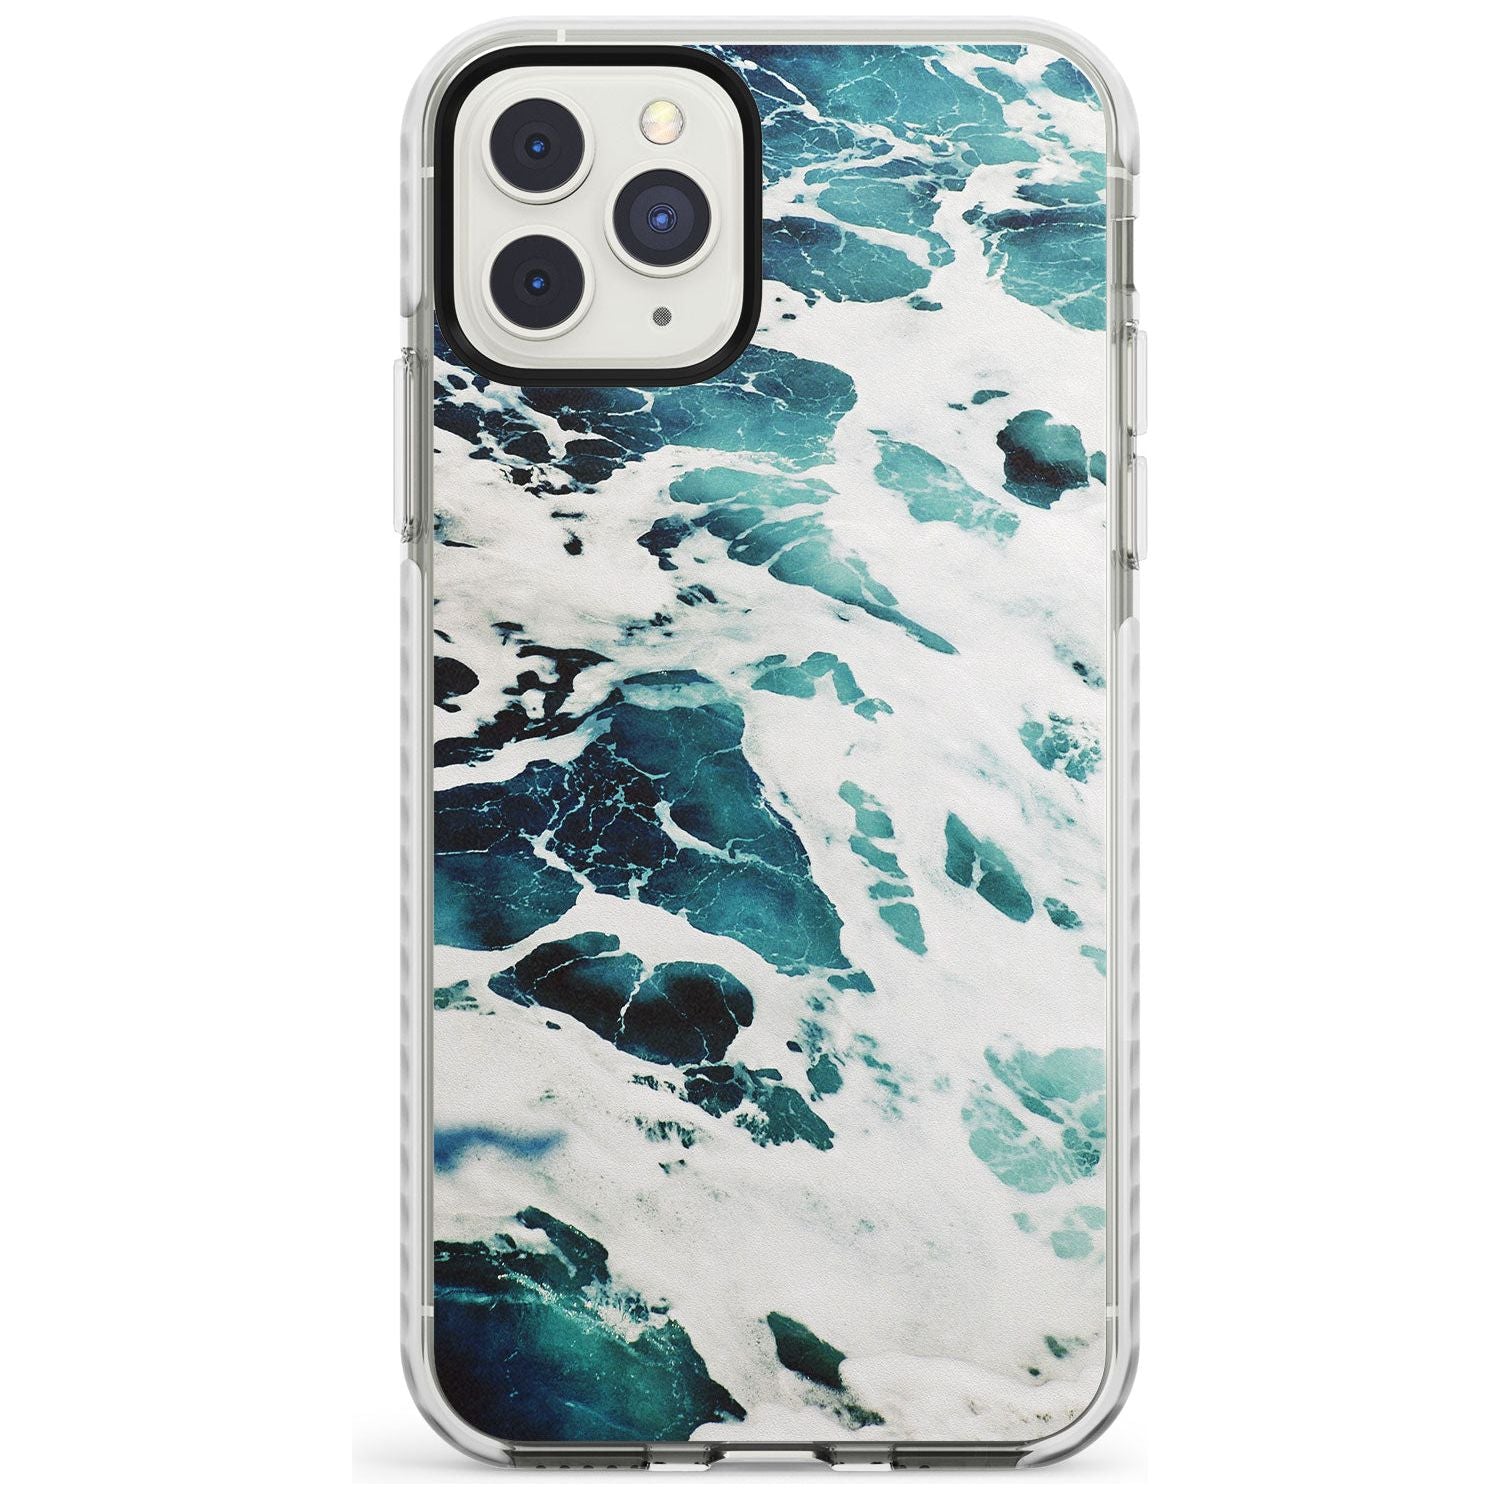 Ocean Waves Photograph Impact Phone Case for iPhone 11 Pro Max